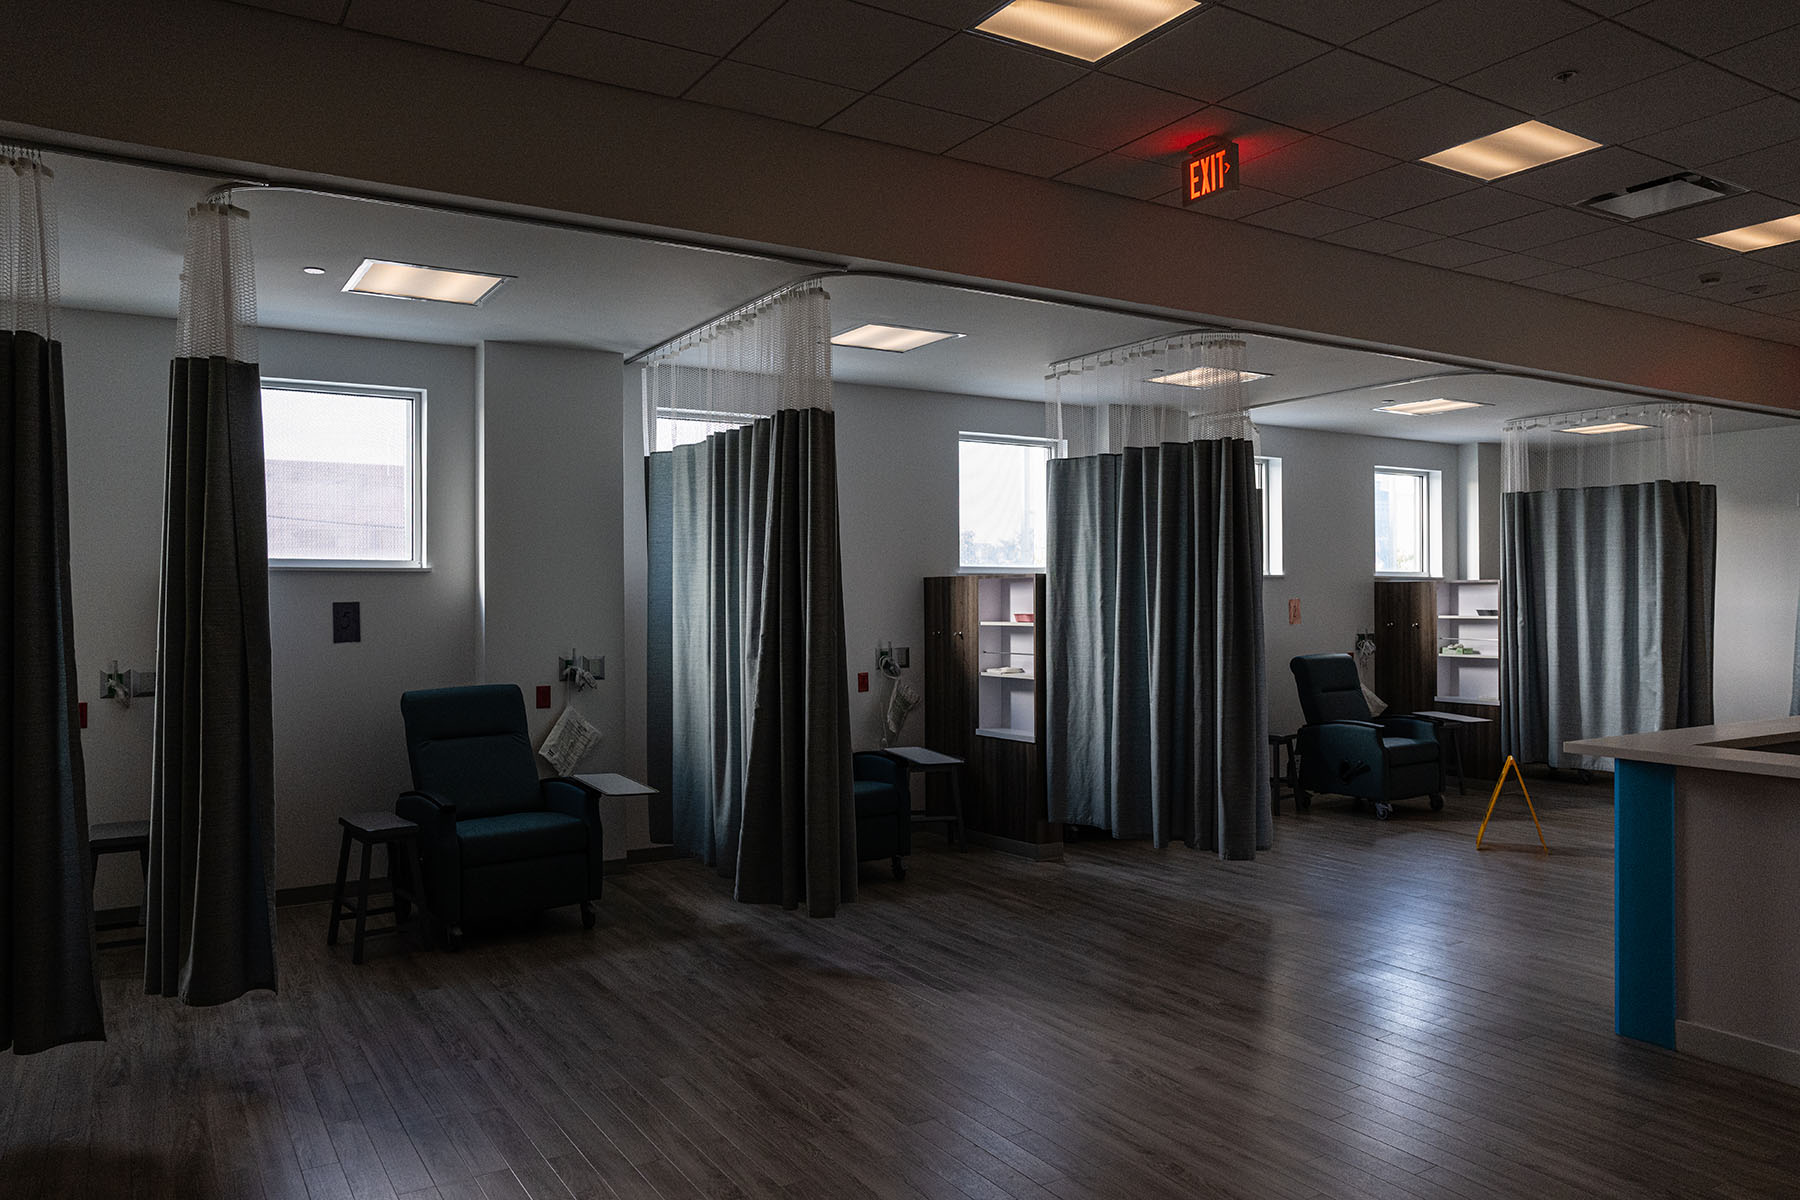 A recovery room is seen at Planned Parenthood Health Center in Louisville, Kentucky.